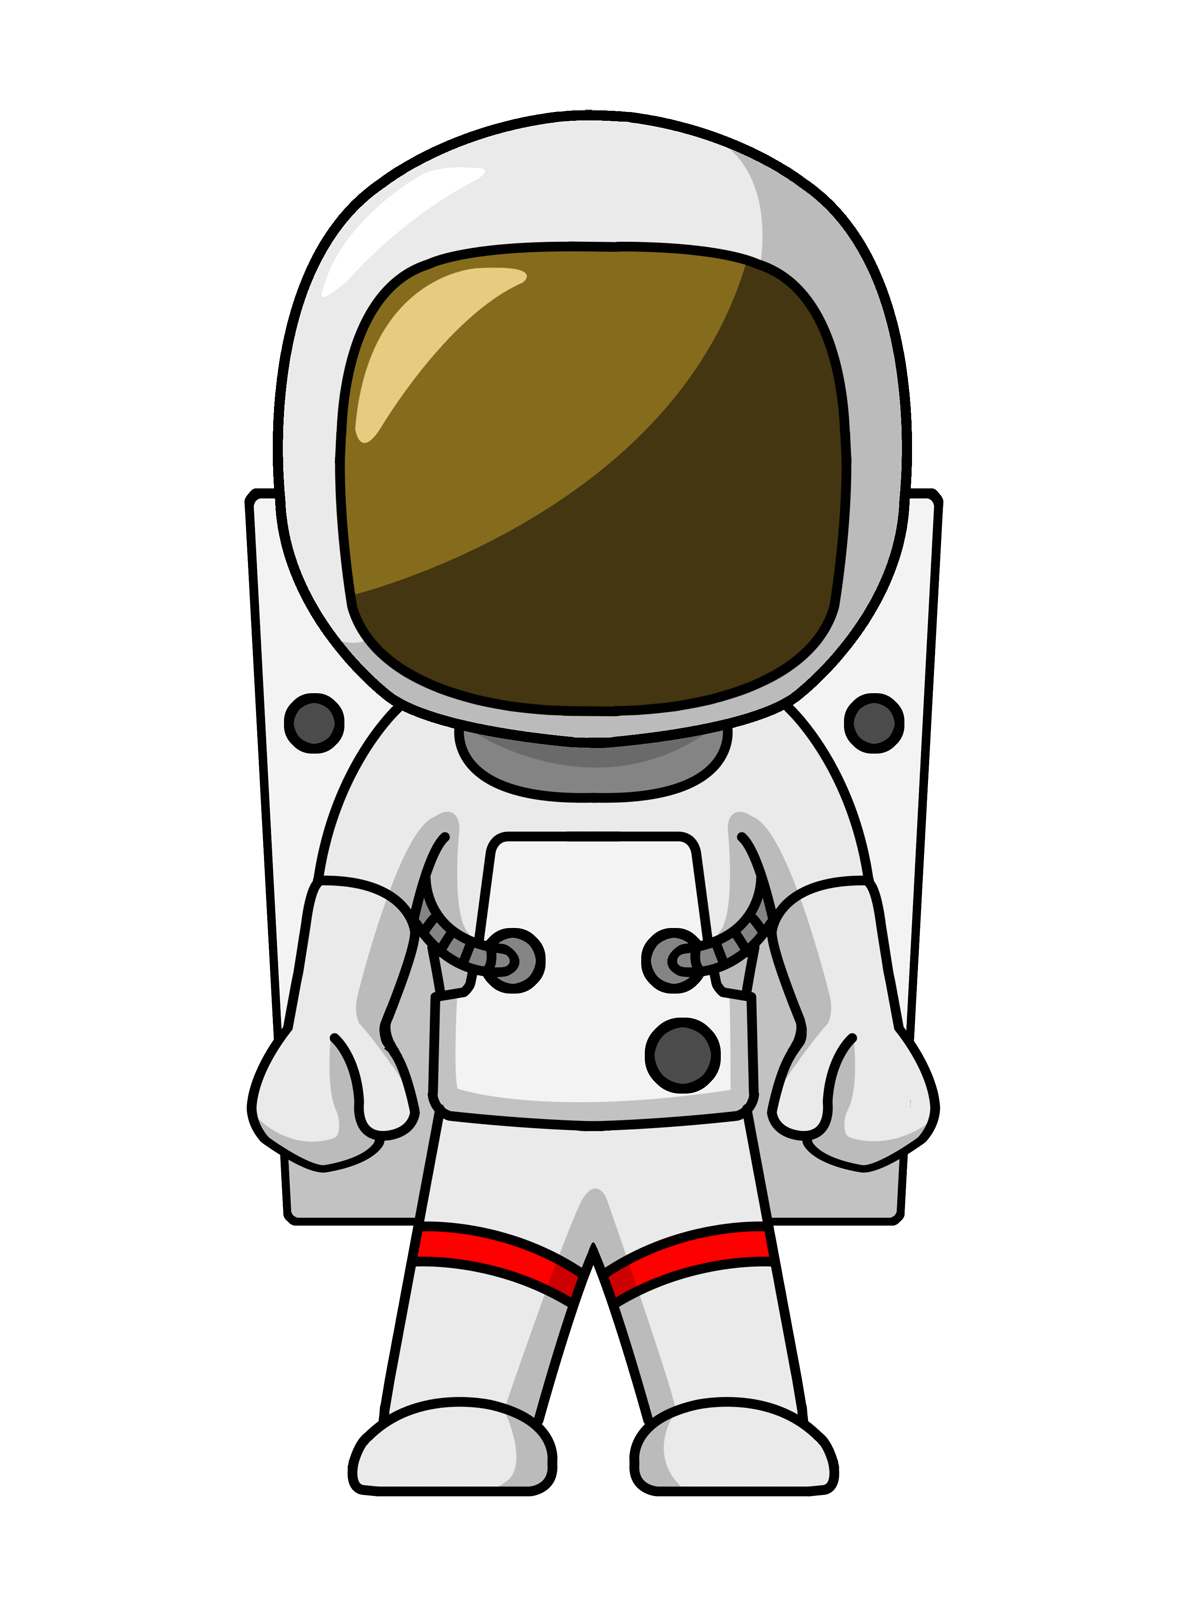 Free Printable Astronaut Mask - ClipArt Best